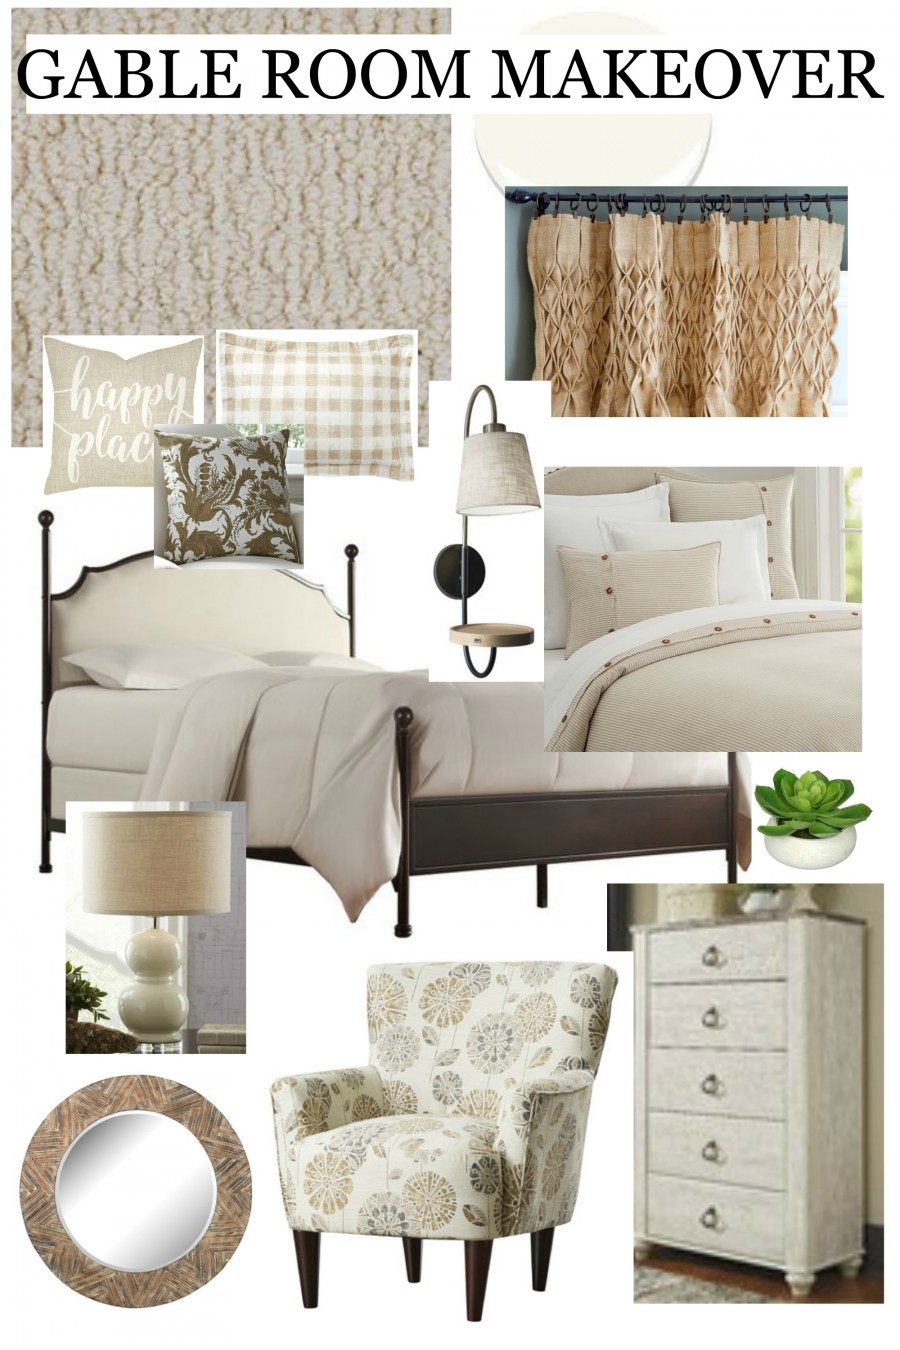 PLANS AND PROGRESS FOR A GABLE ROOM MAKEOVER… AND EPISODE 13 OF DECORATING TIPS AND TRICKS